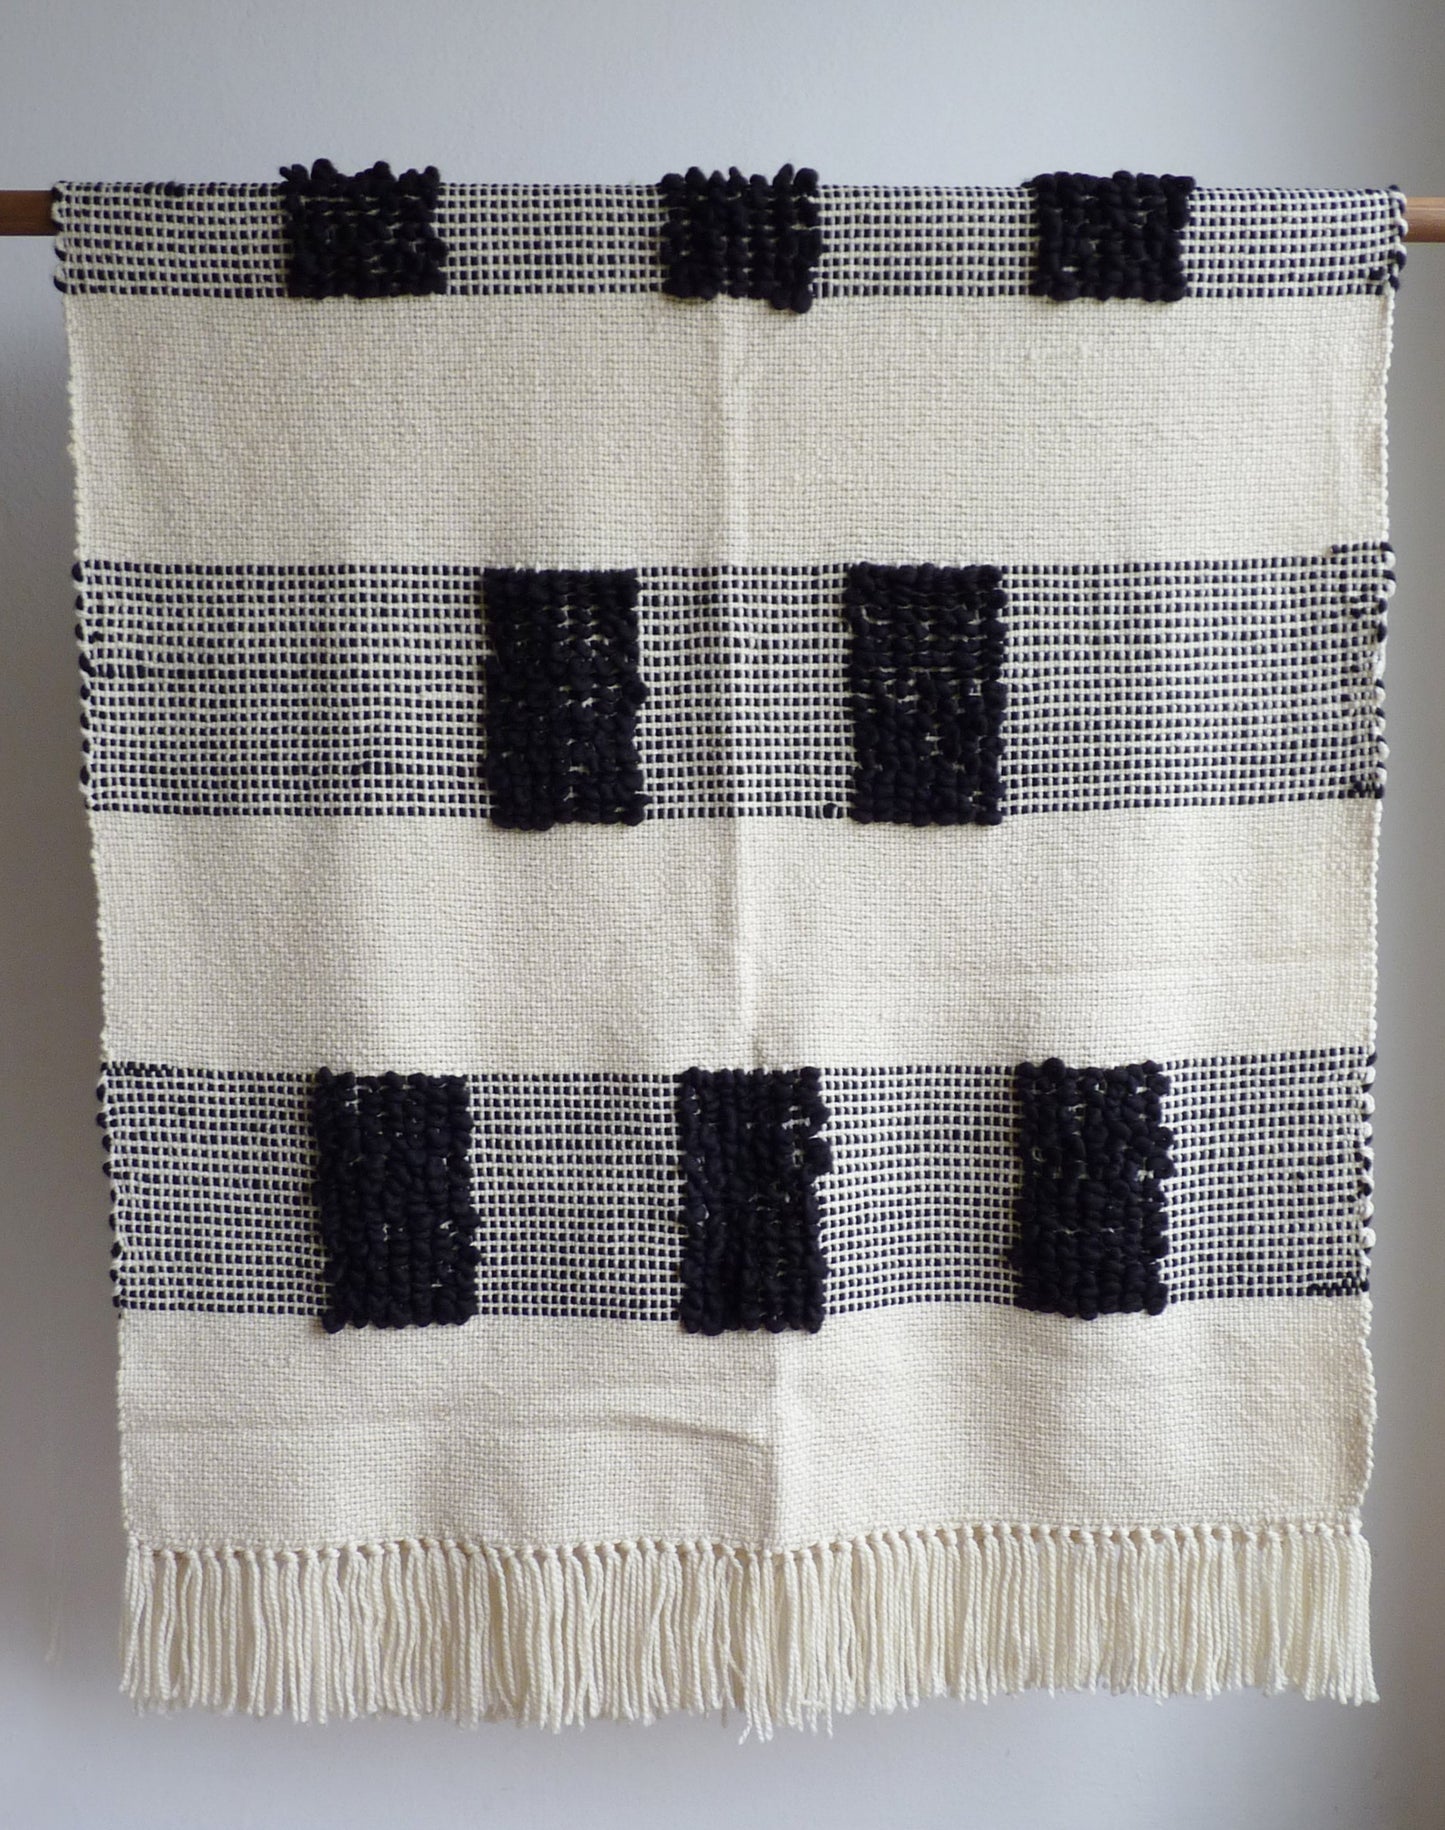 Off White Blanket with Black Embroidery Loops in Geometric Design  with fringes